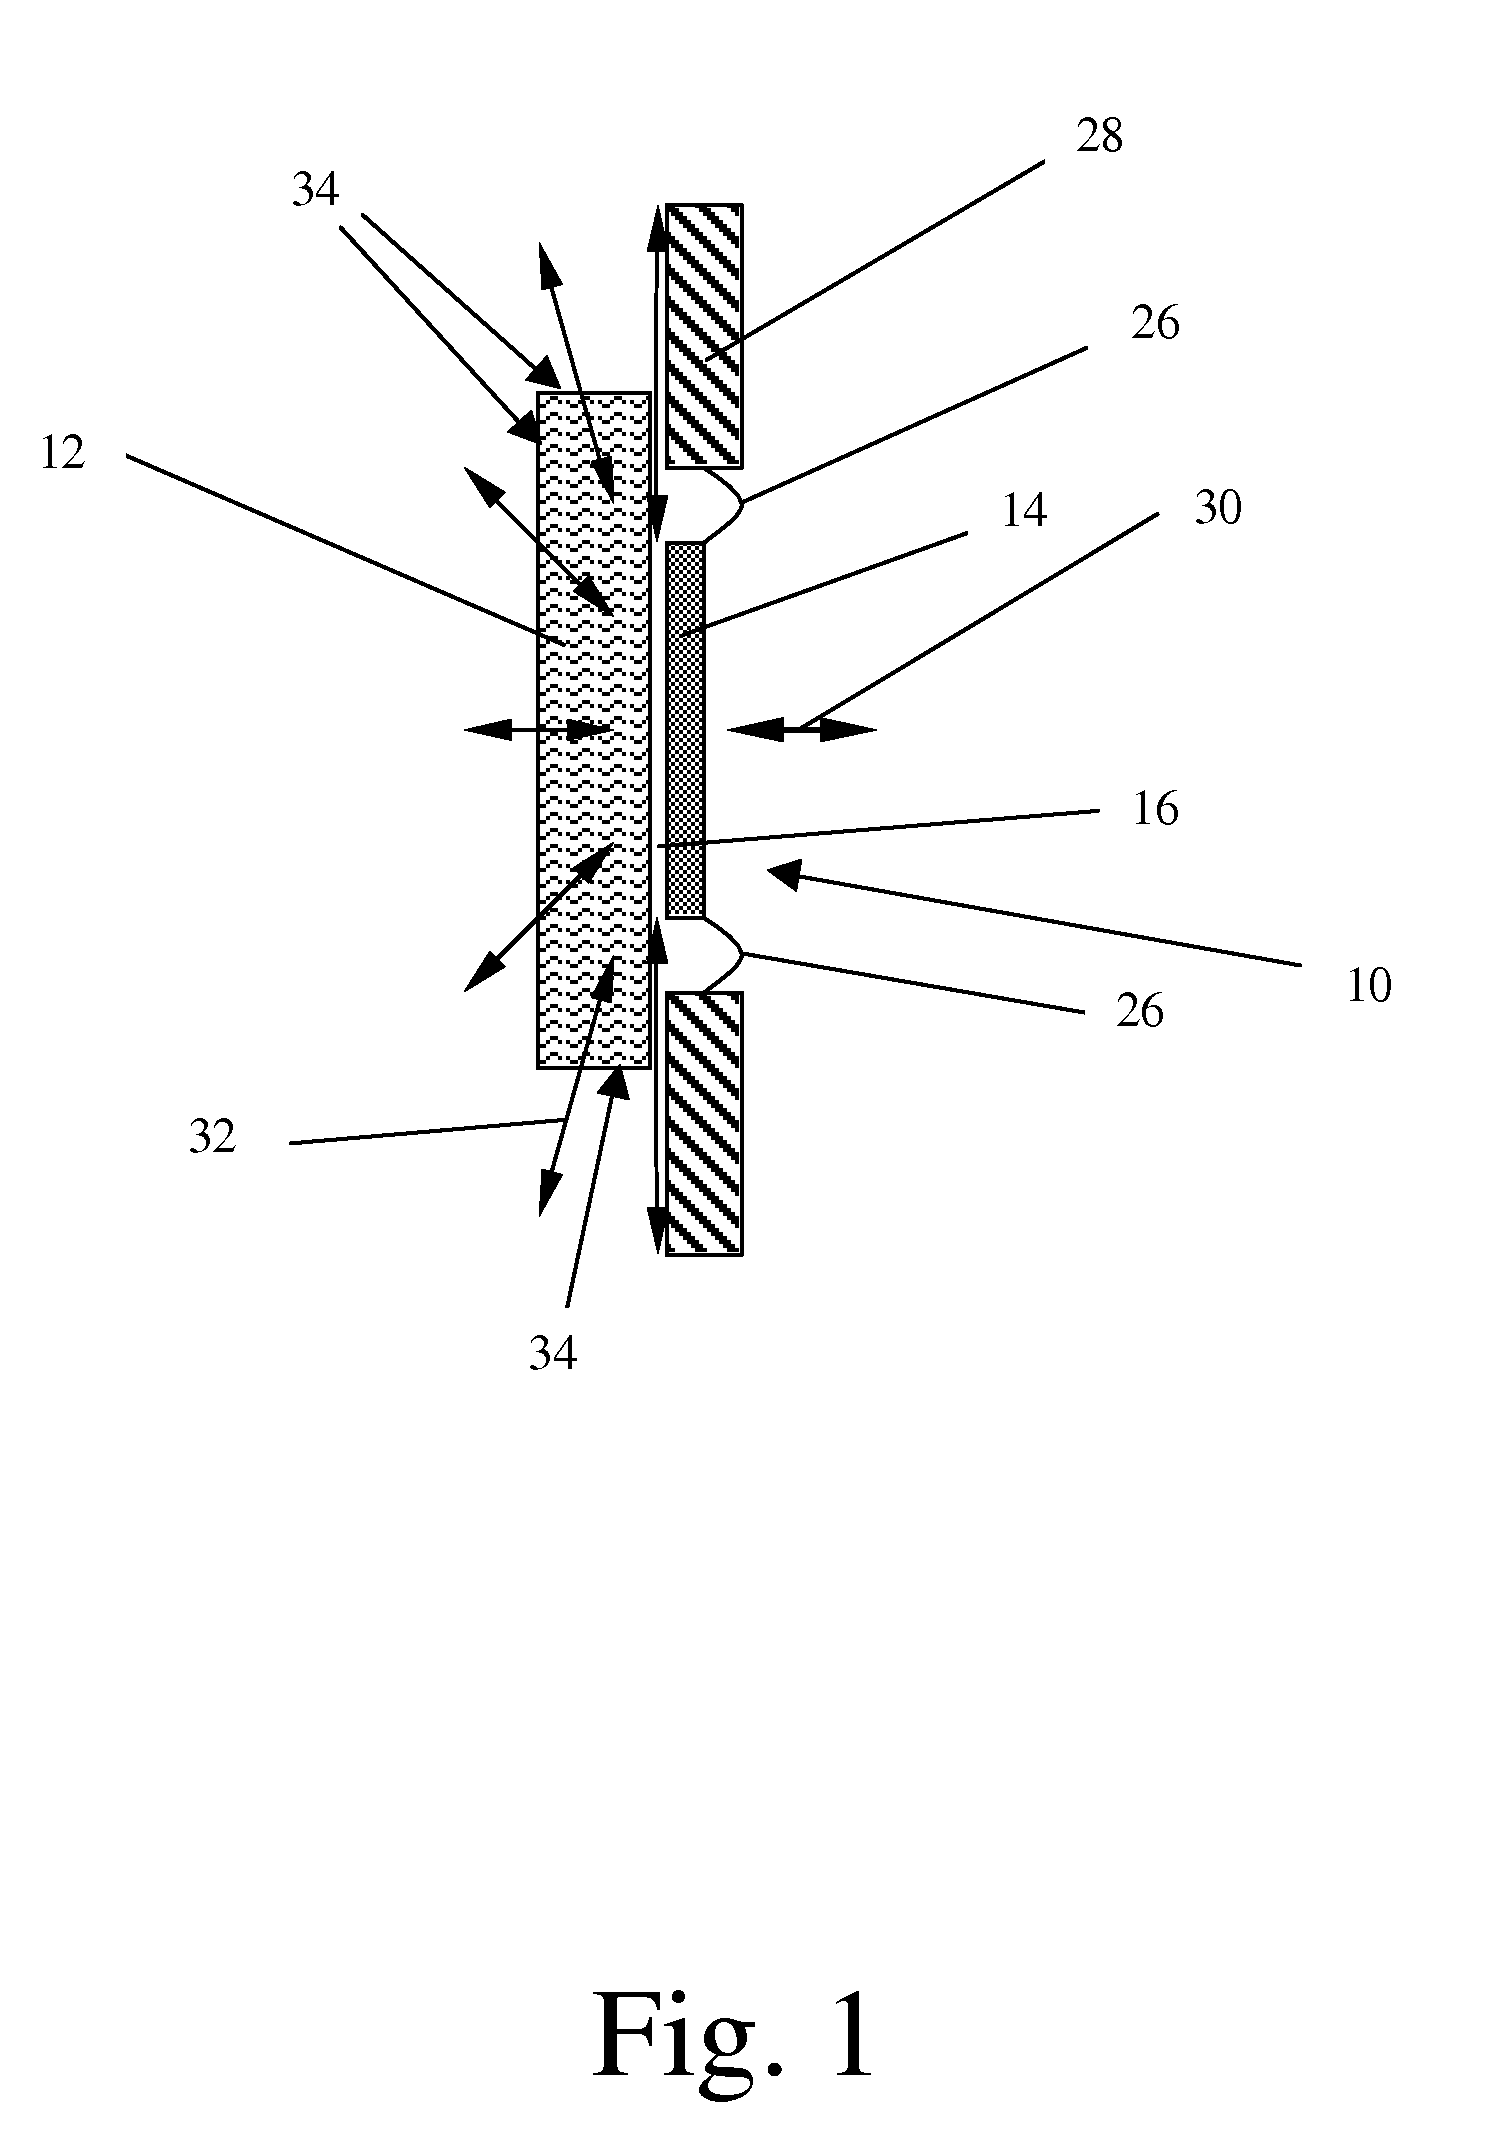 Arrangement For Optimizing the Frequency Response of an Electro-Acoustic Transducer